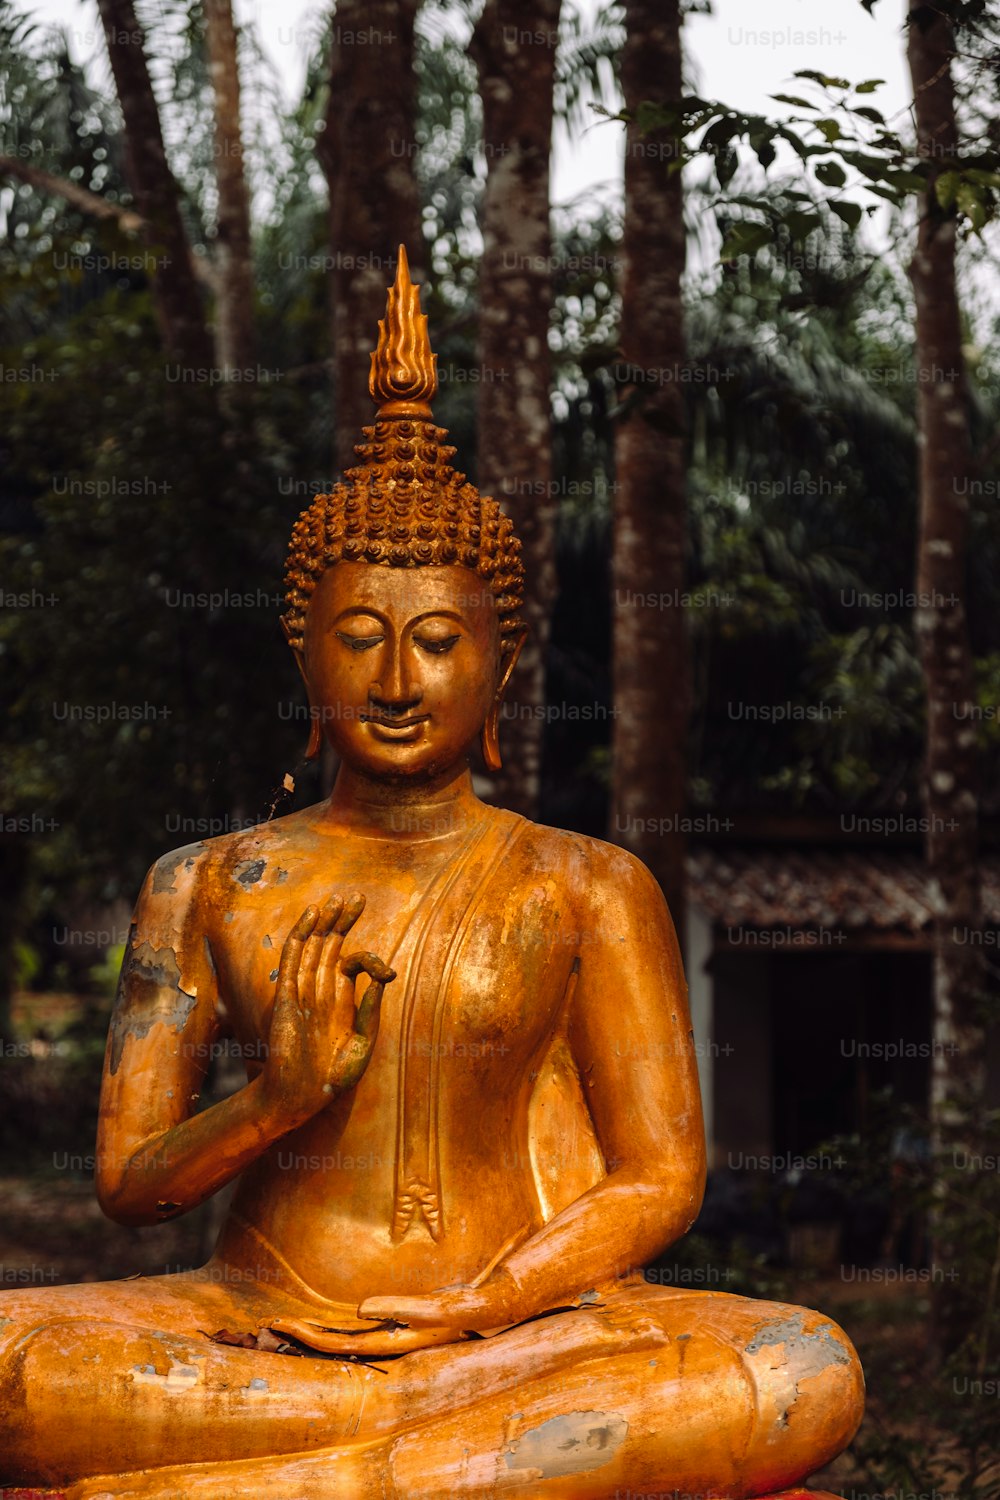 a golden buddha statue sitting in a forest